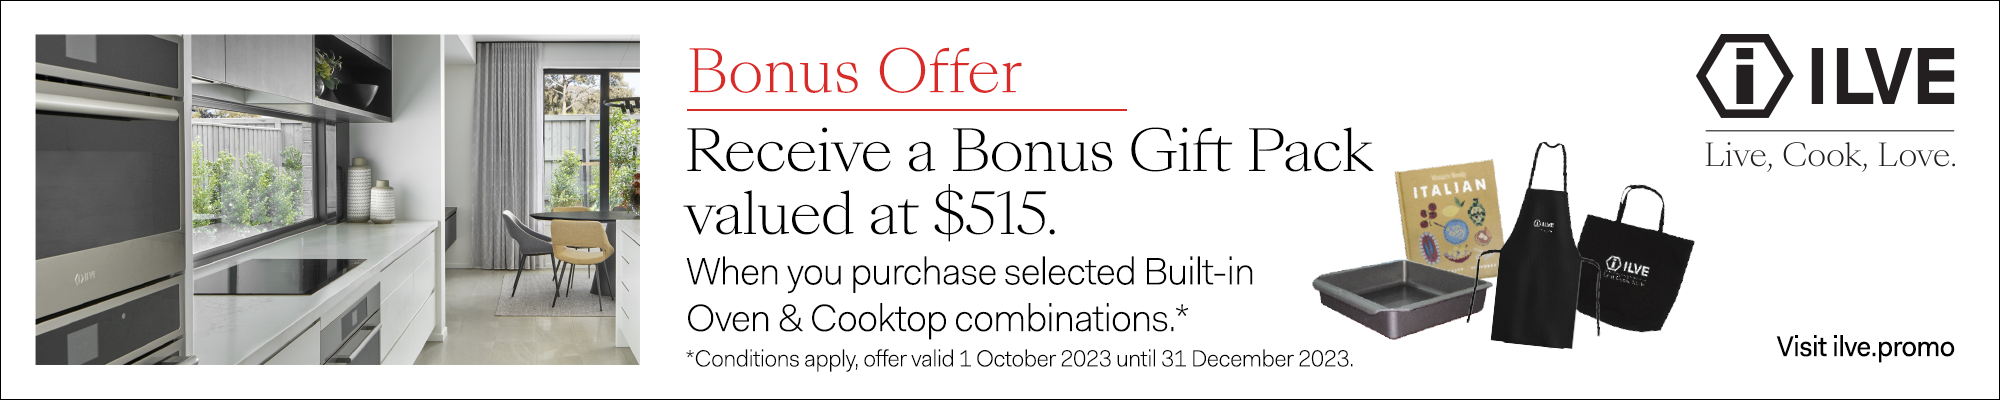 Receive A Bonus Gift Pack Valued at $515 When You Purchase Selected Built-In Oven & Cooktop Combinations*